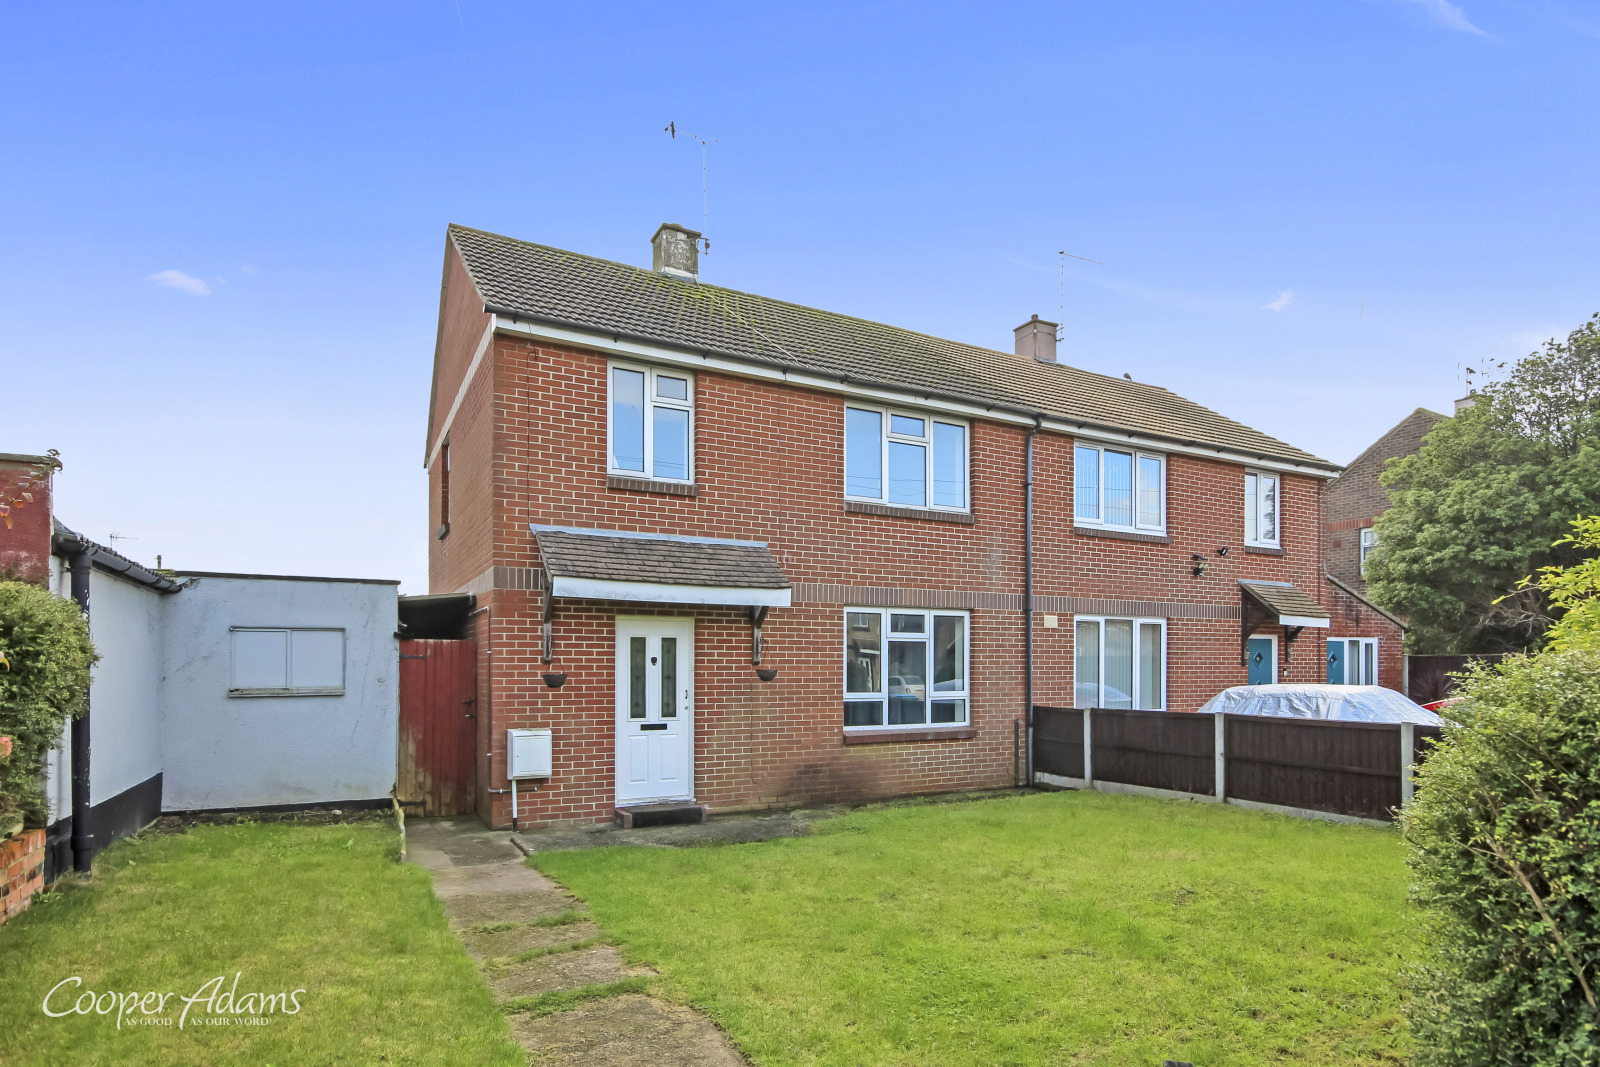 3 bed house to rent in Roundstone Drive, East Preston - Property Image 1